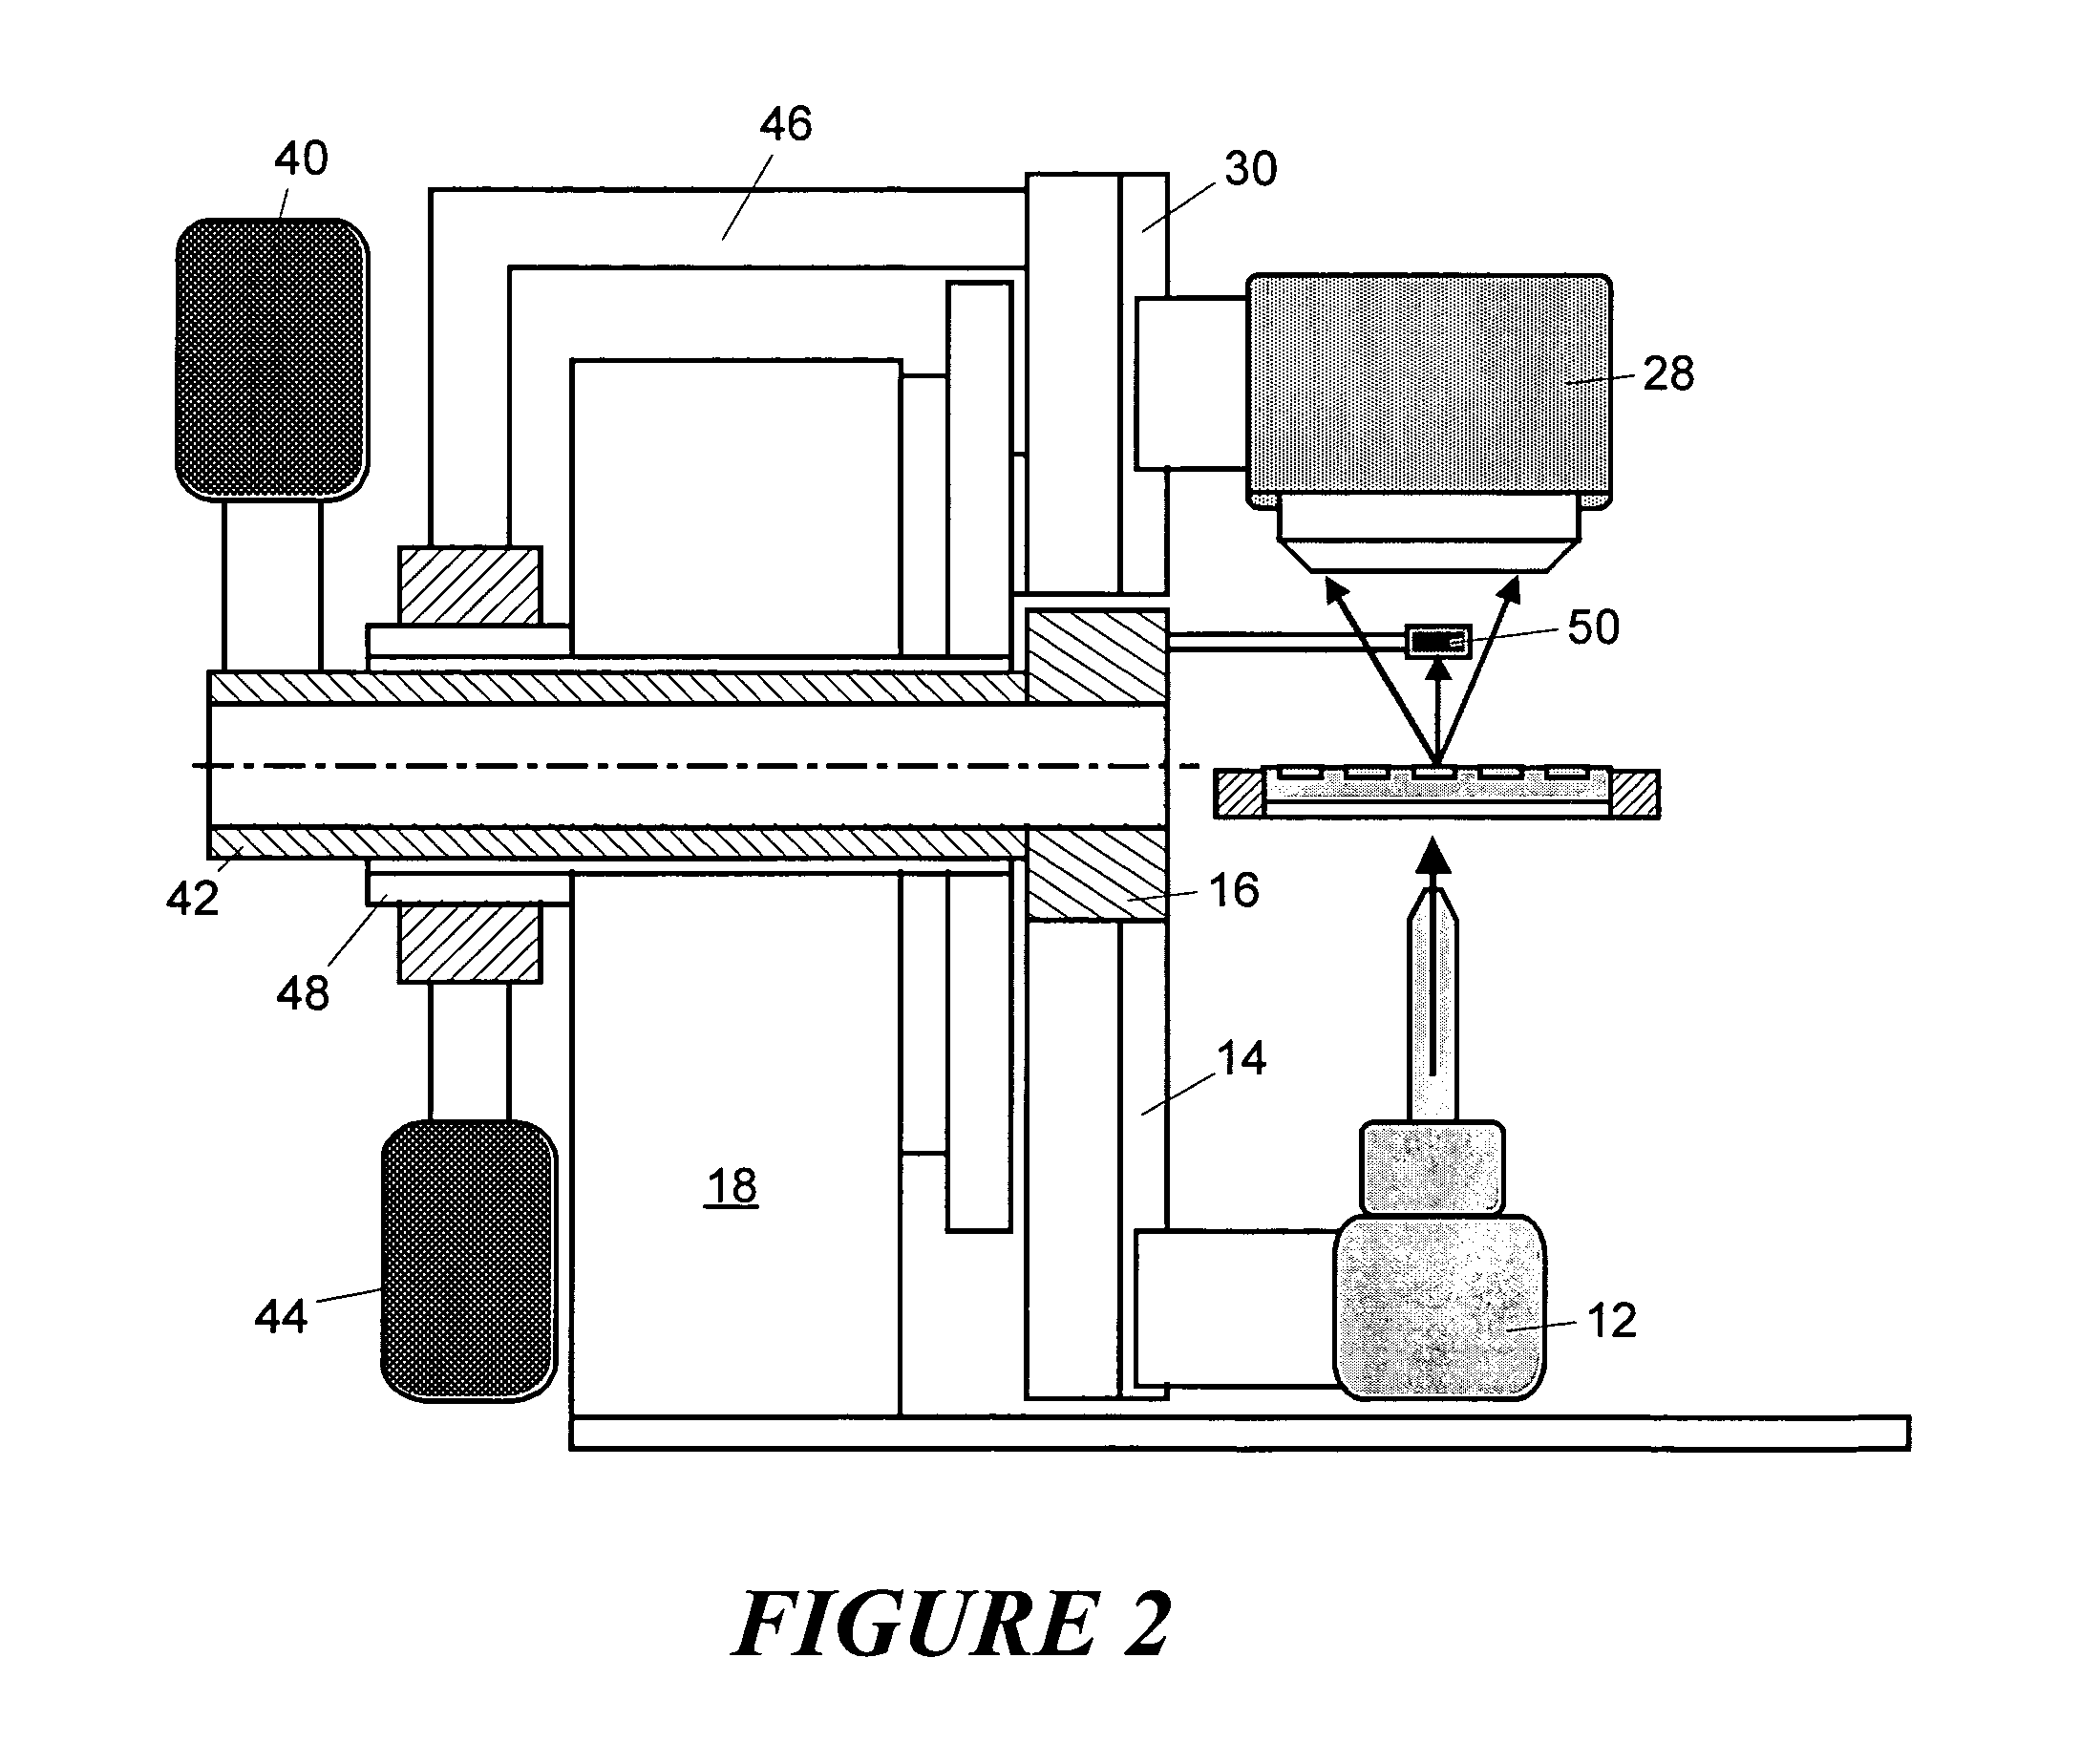 X-ray diffraction screening system convertible between reflection and transmission modes